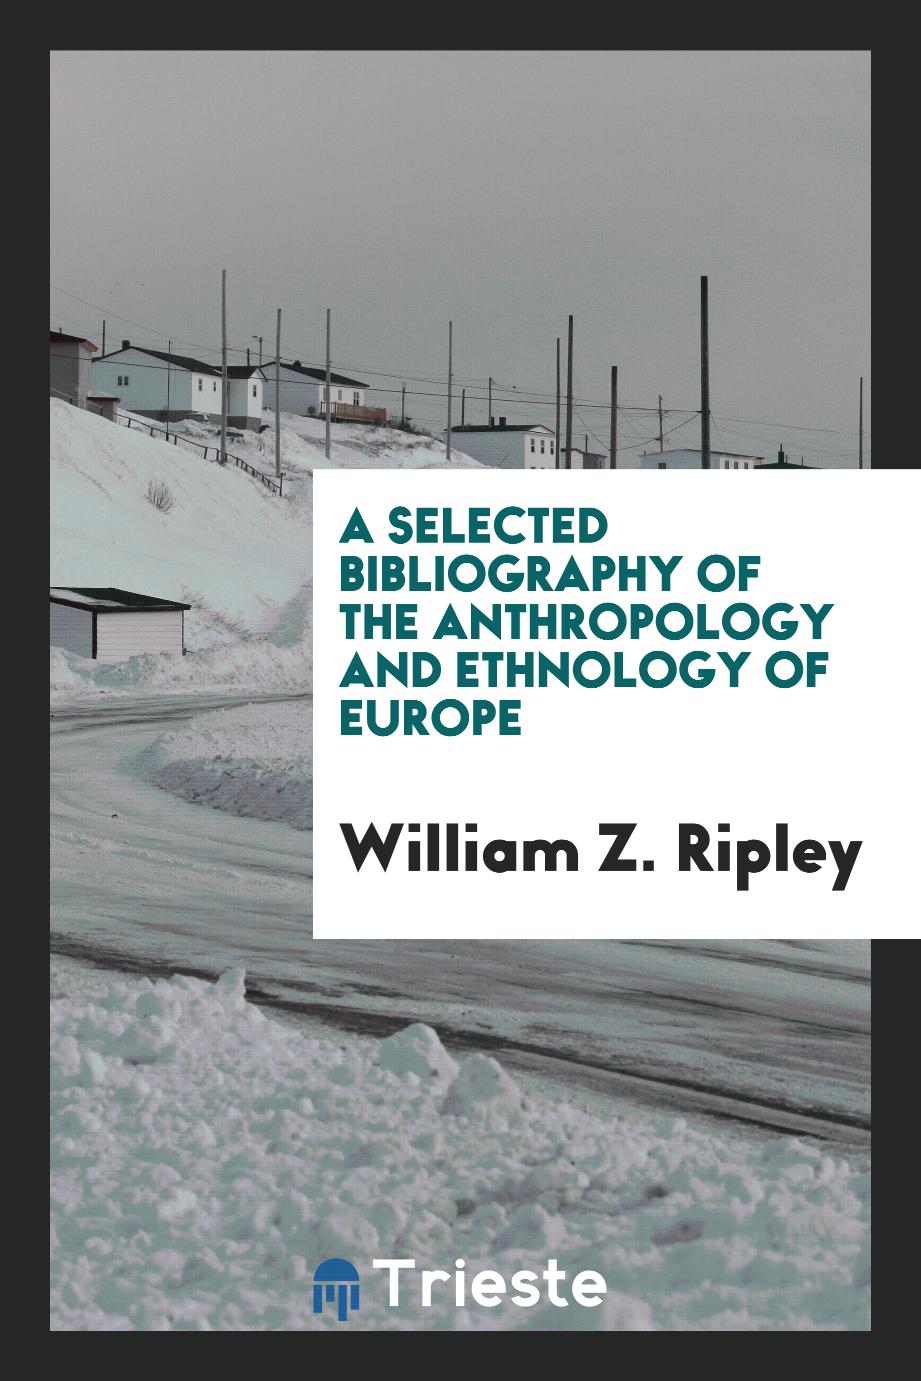 William Z. Ripley - A Selected Bibliography of the Anthropology and Ethnology of Europe